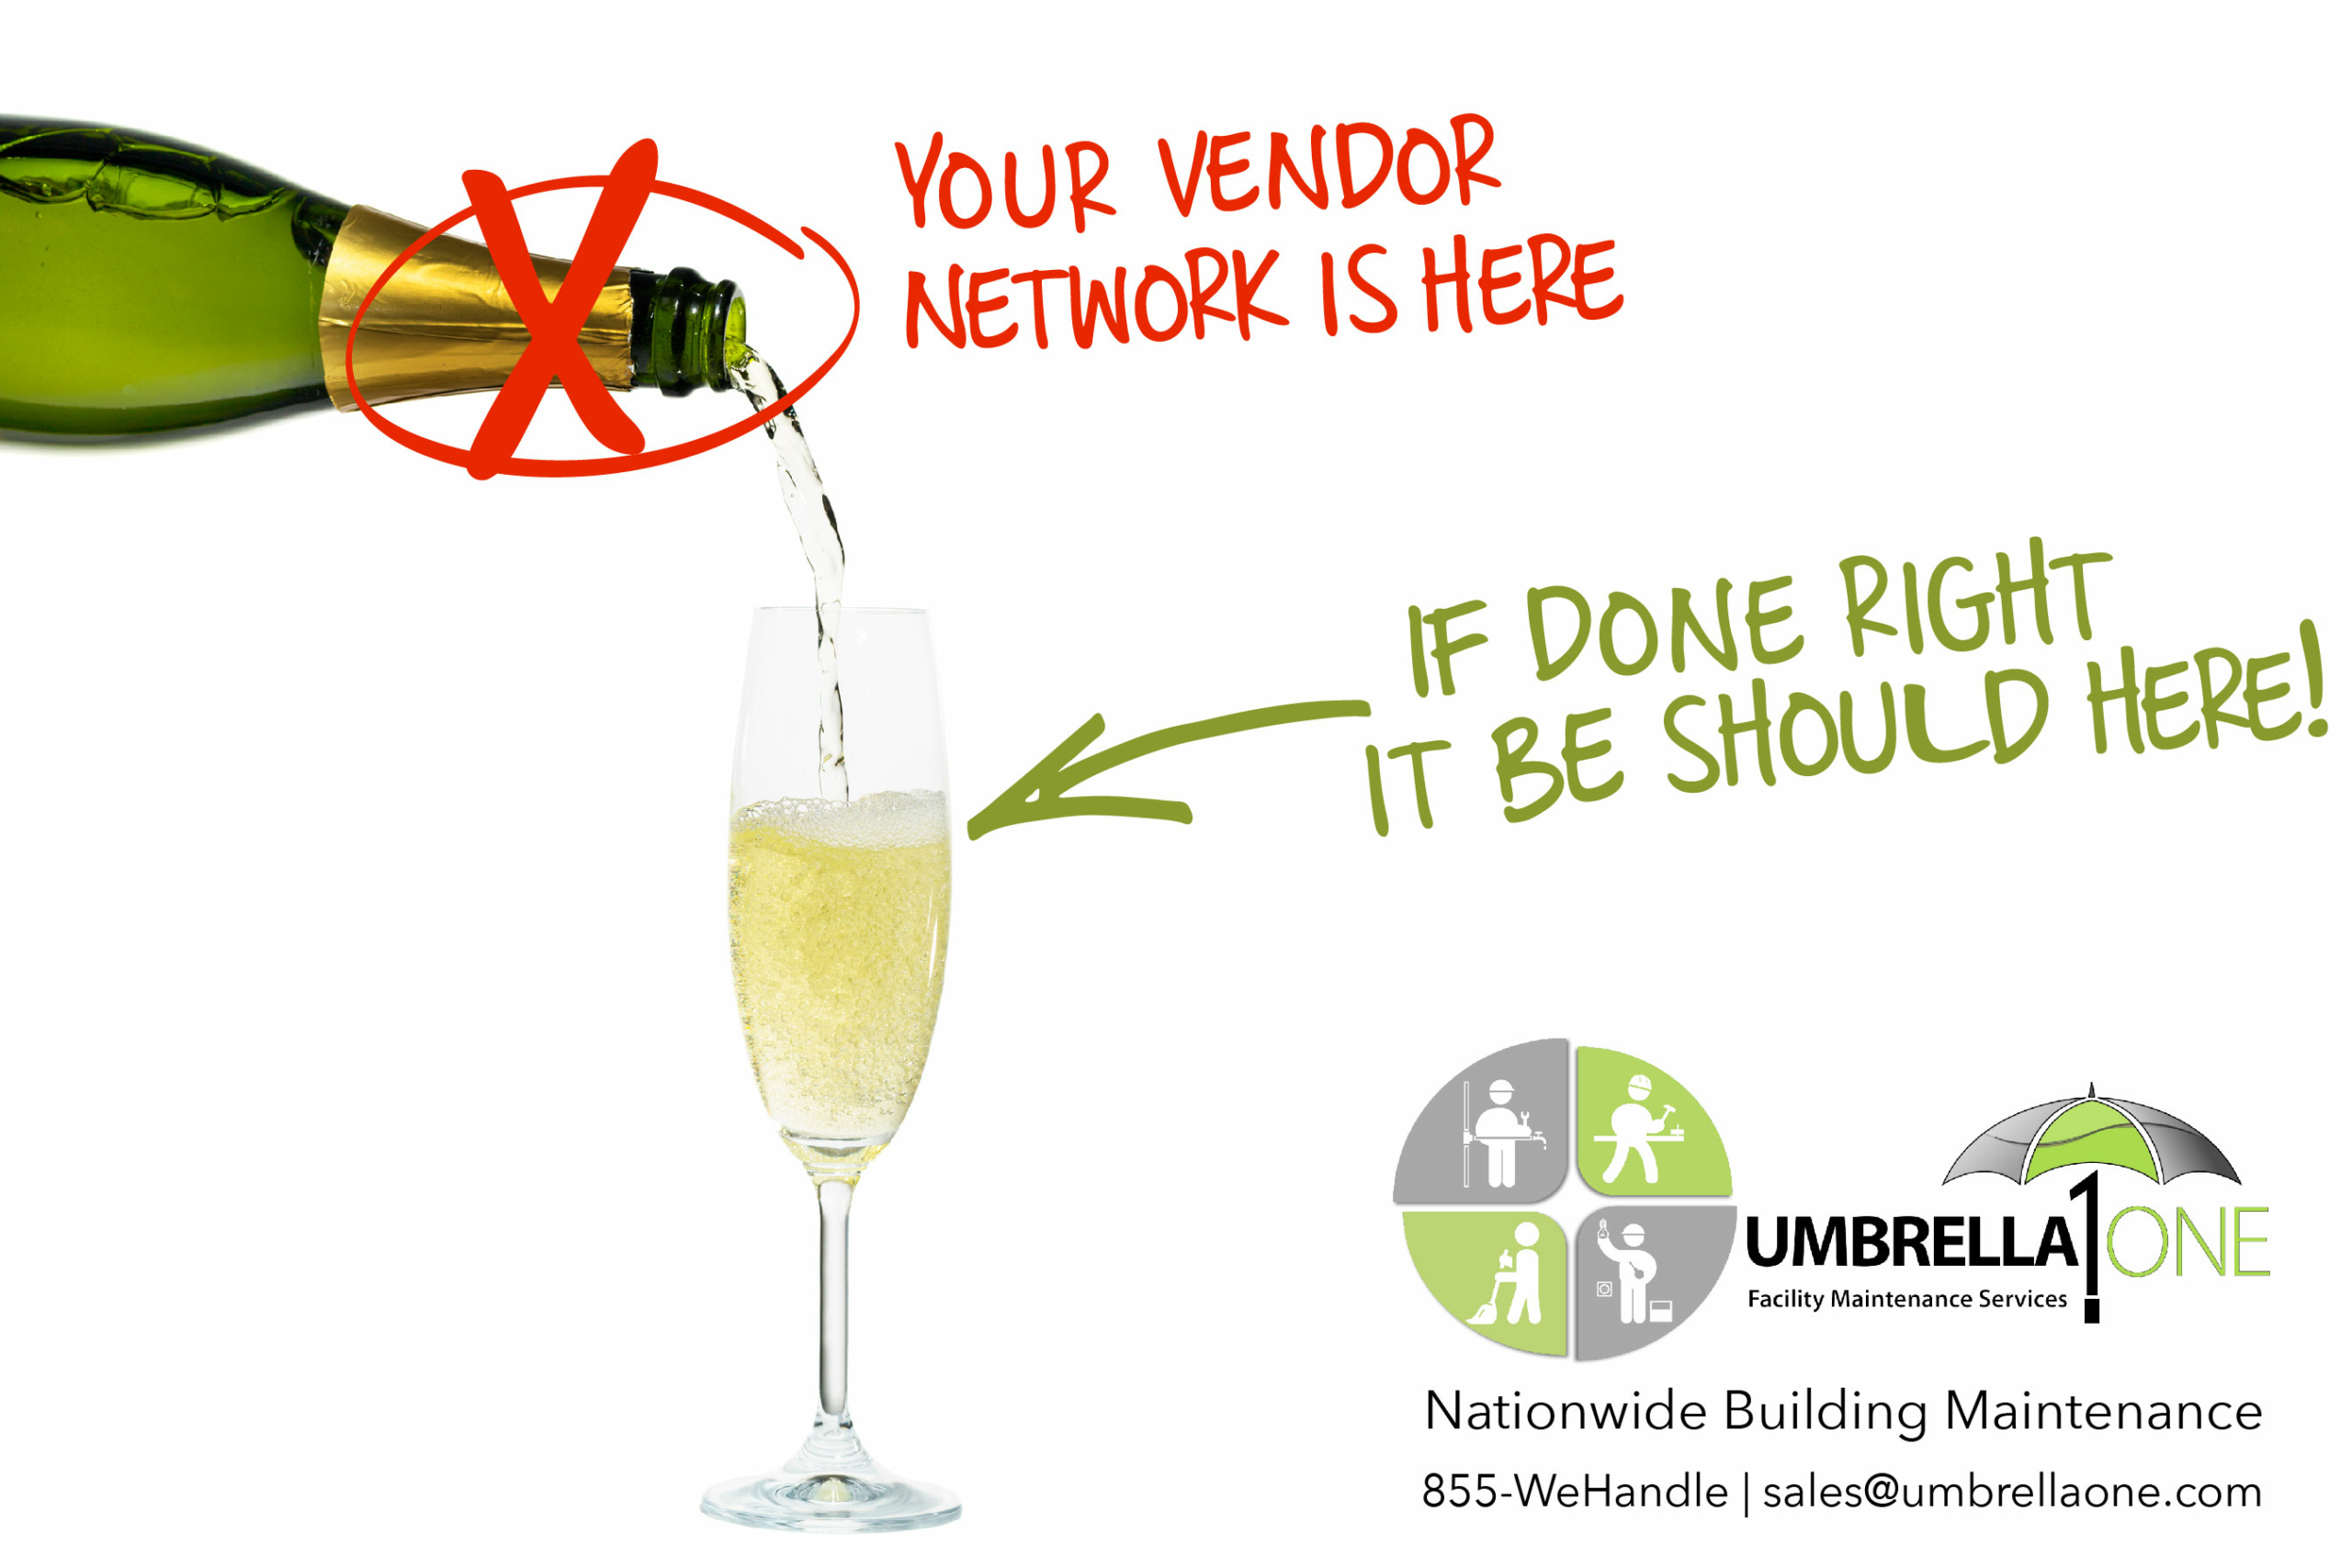 caption: your vendor network is here. if done right it should be here